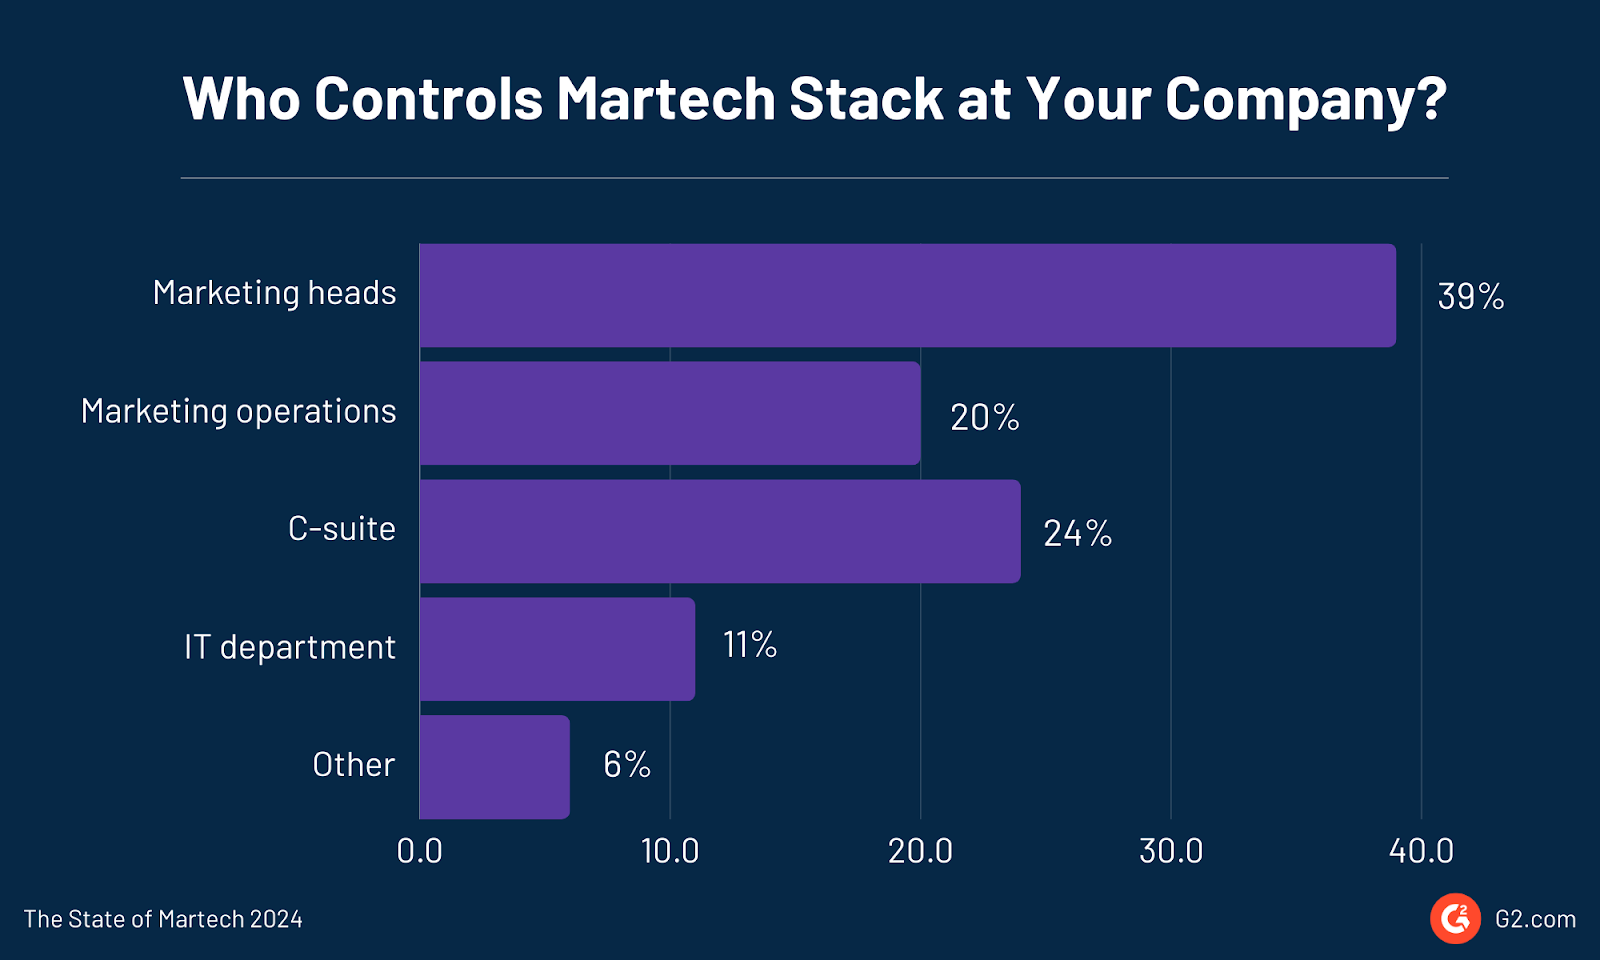 Who owns the martech stack